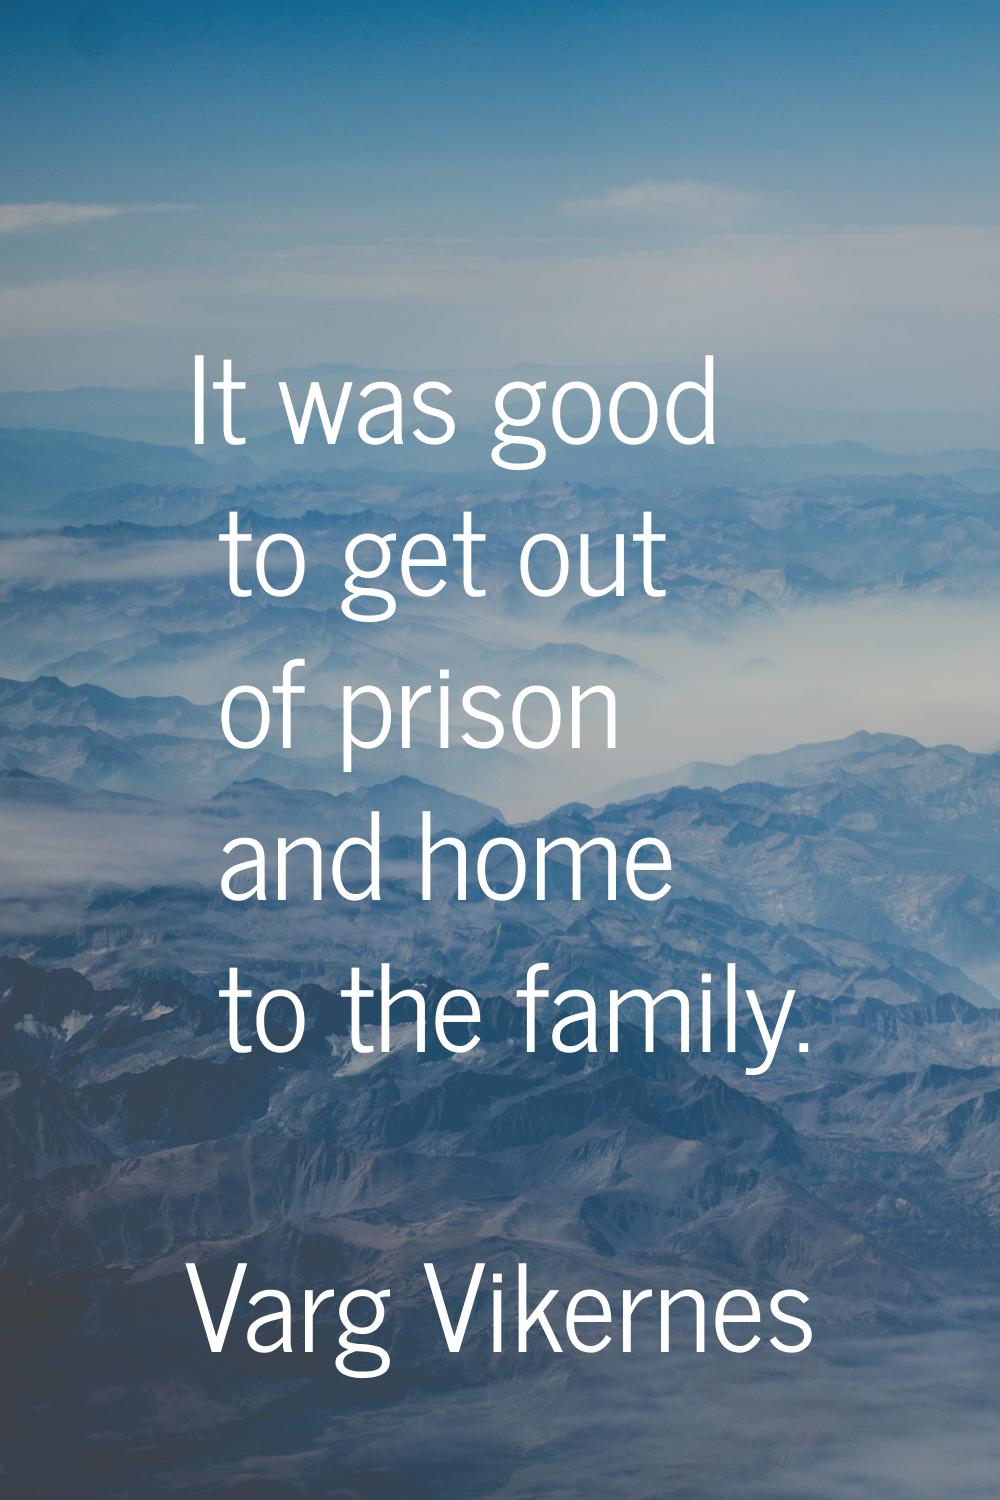 It was good to get out of prison and home to the family.